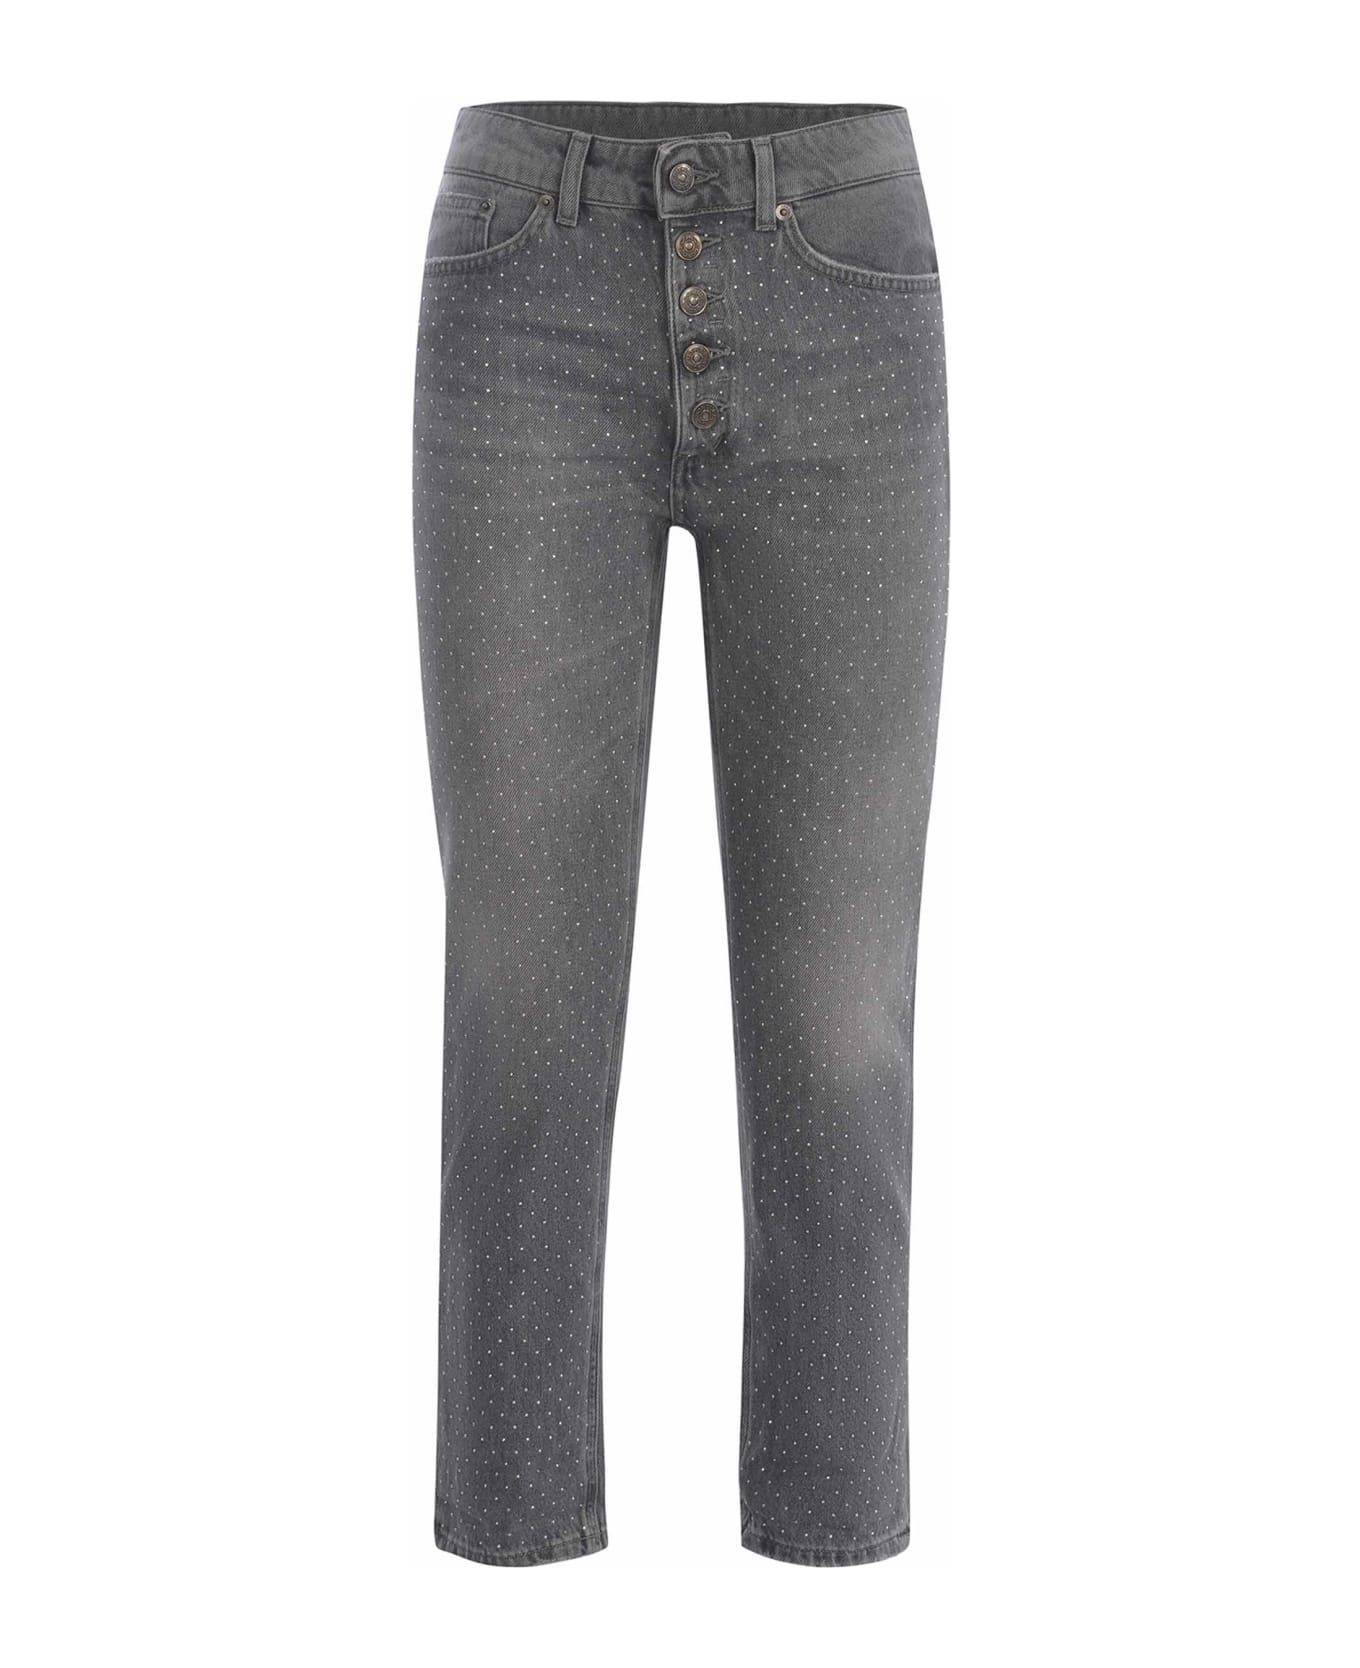 Dondup Cropped Dotted Jeans - Denim grigio